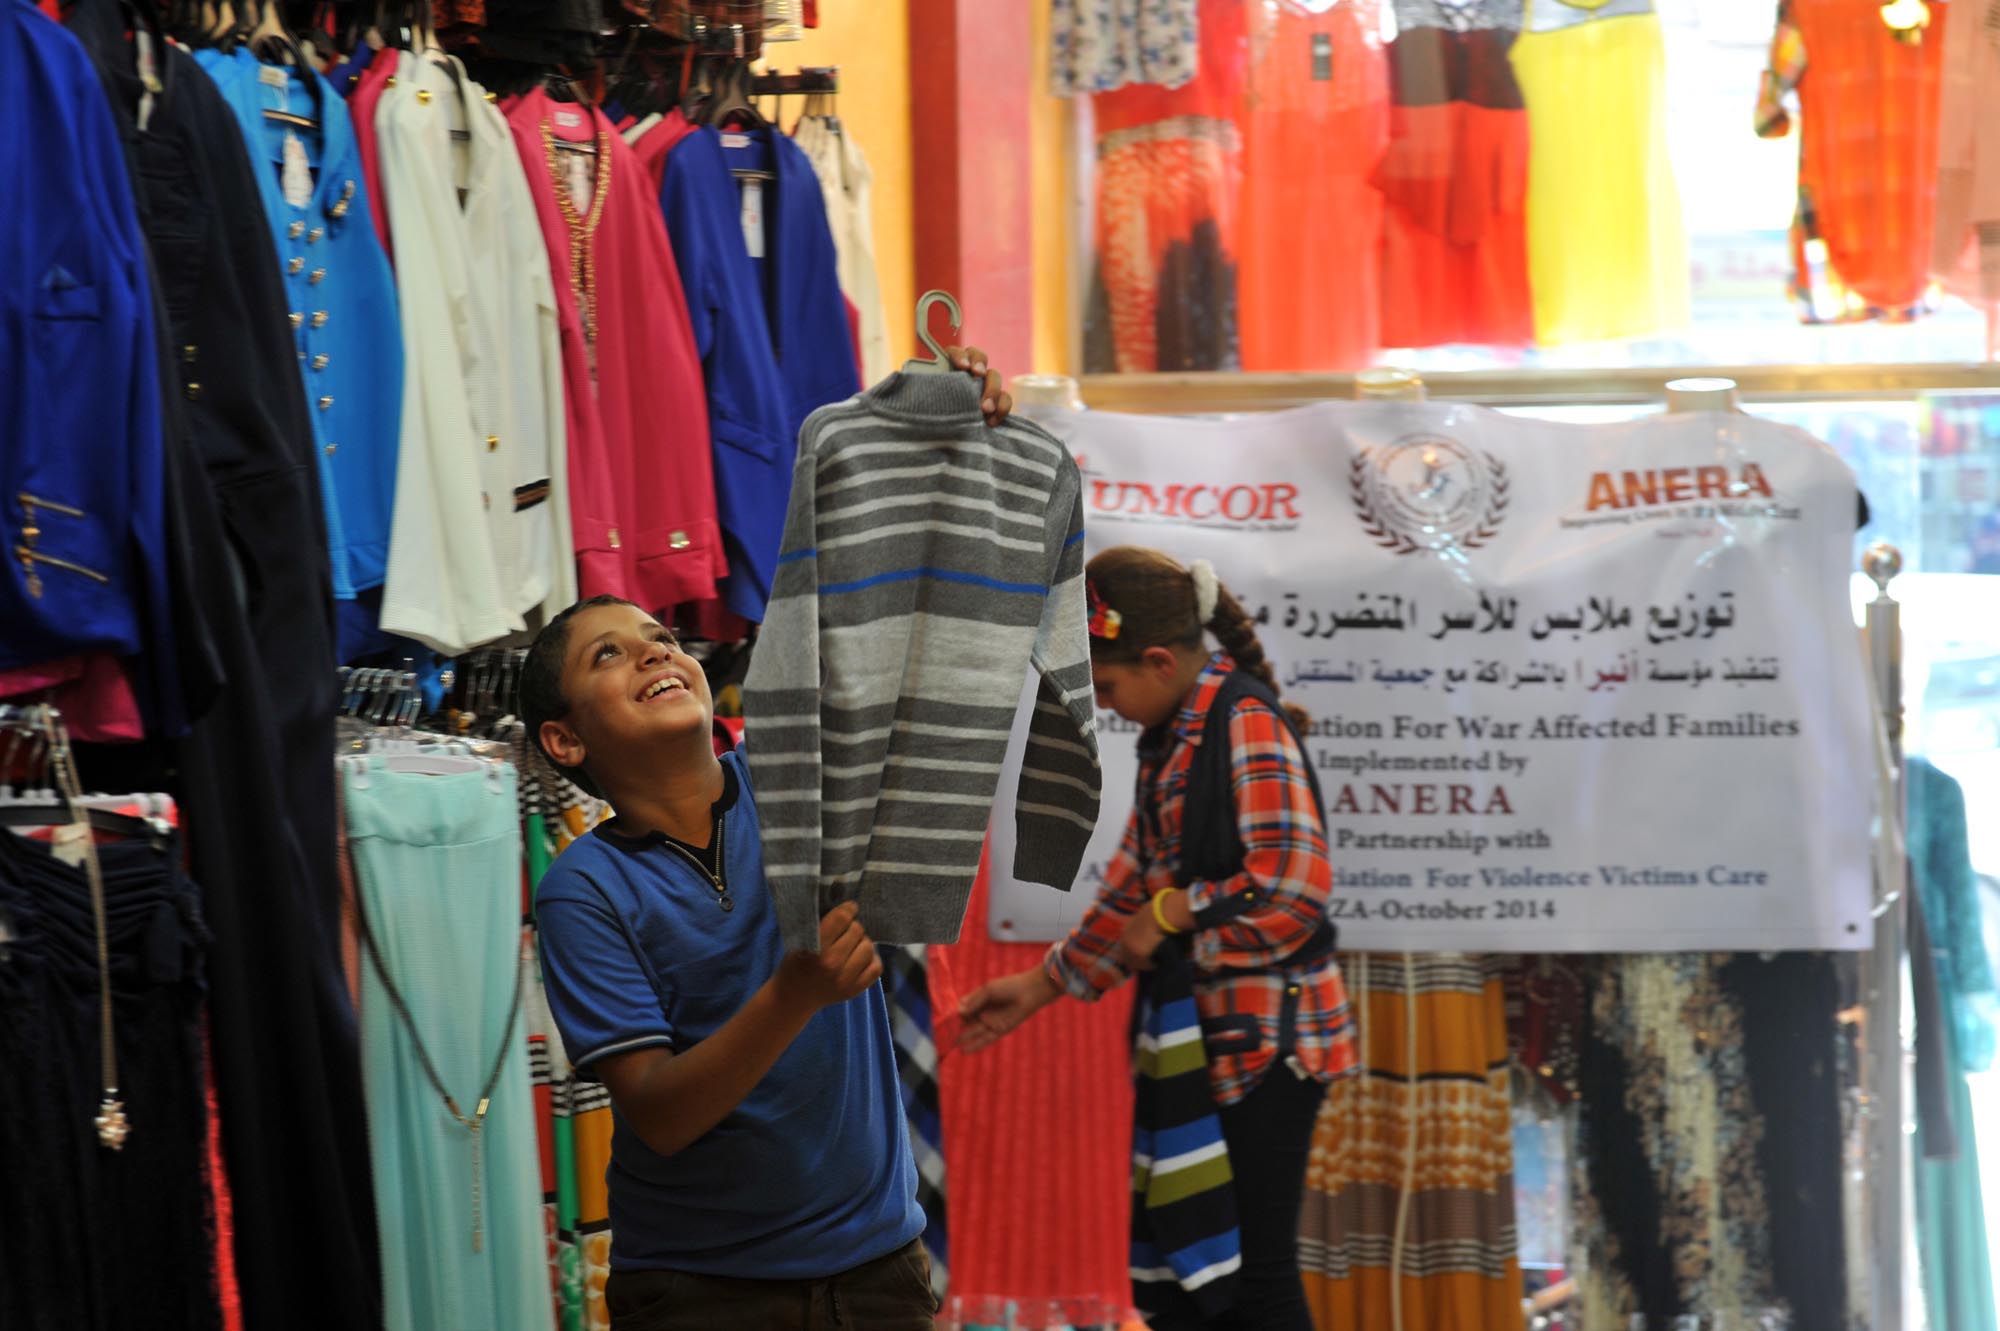 A young Gaza boy, displaced by war, shops for winter clothes with Anera clothing vouchers.